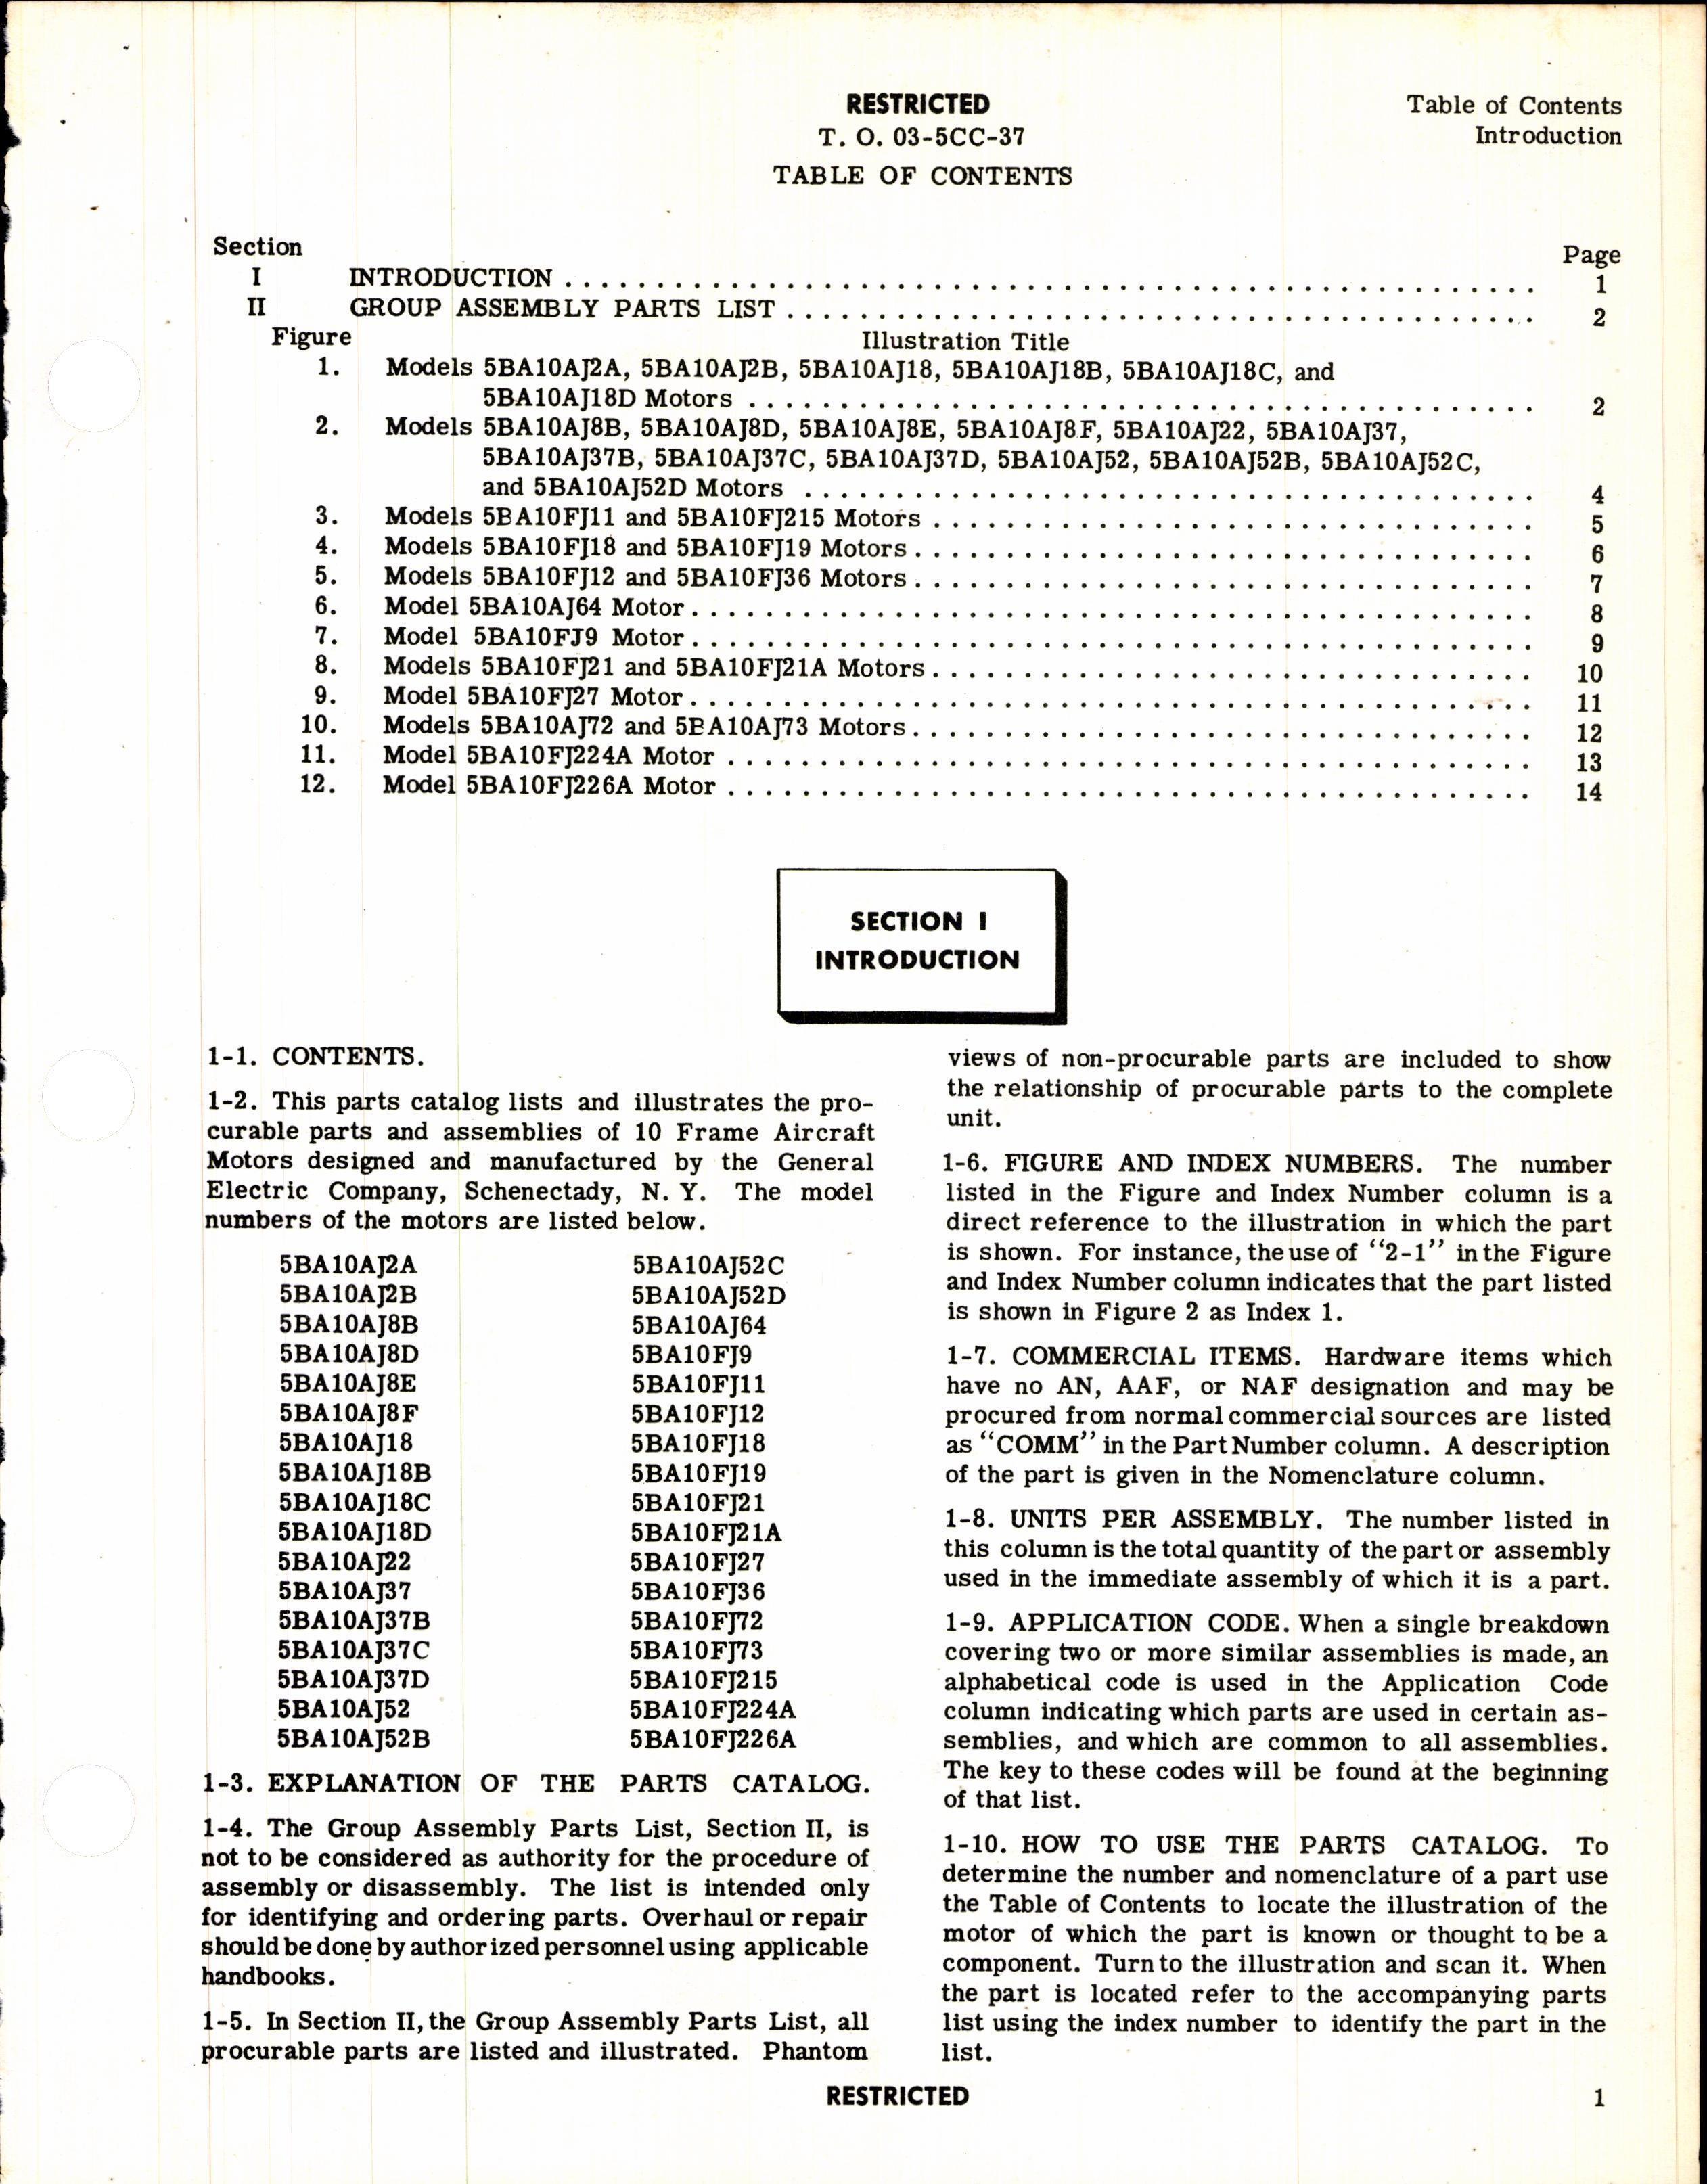 Sample page 3 from AirCorps Library document: Parts Catalog for General Electric Aircraft Motors, Series 5BA10